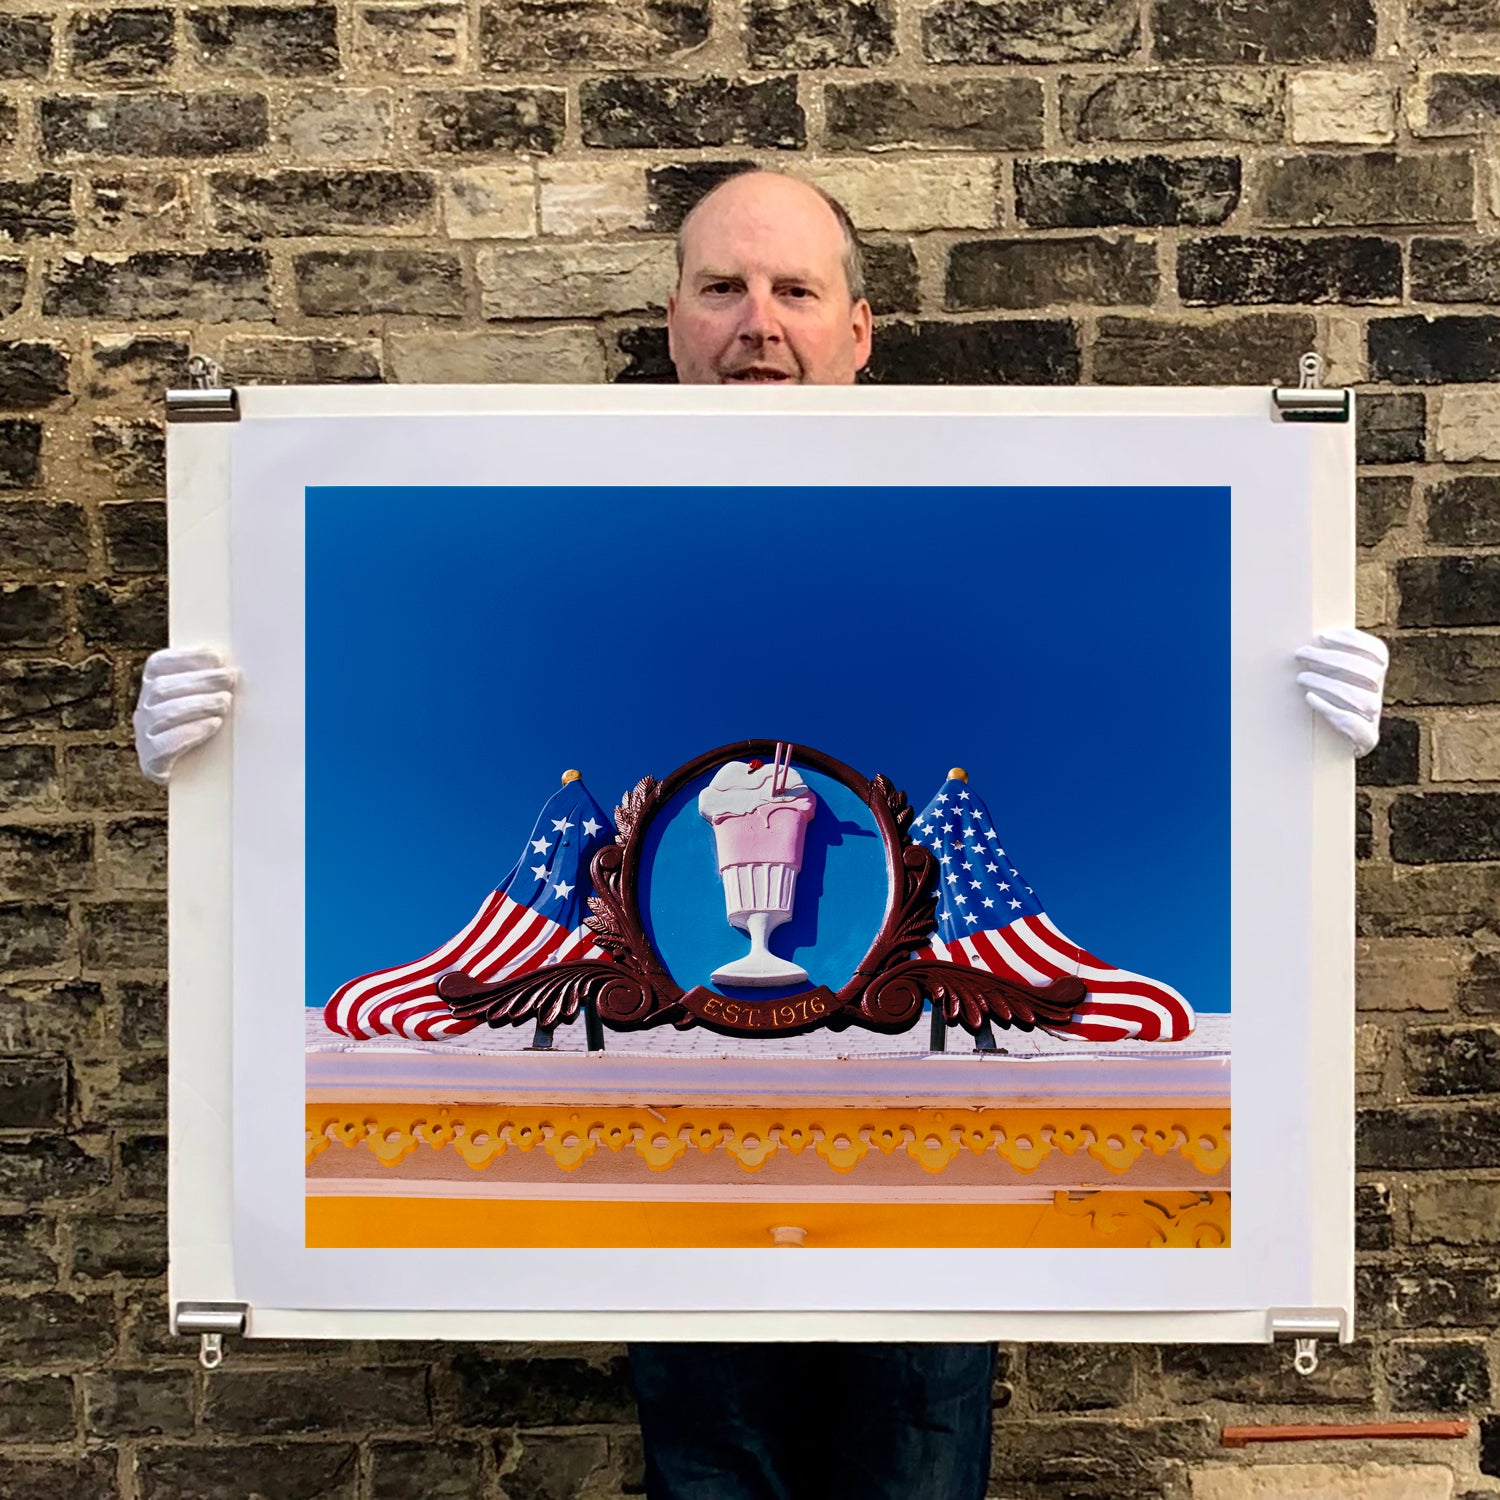 Photograph held by photographer Richard Heeps. A 3D shape milkshake parlour sign which has a pink milkshake with a white top, cherry and straws, surrounded by a wooden type shield, and on either side the look of draped American flags. This is set against a blue sky.